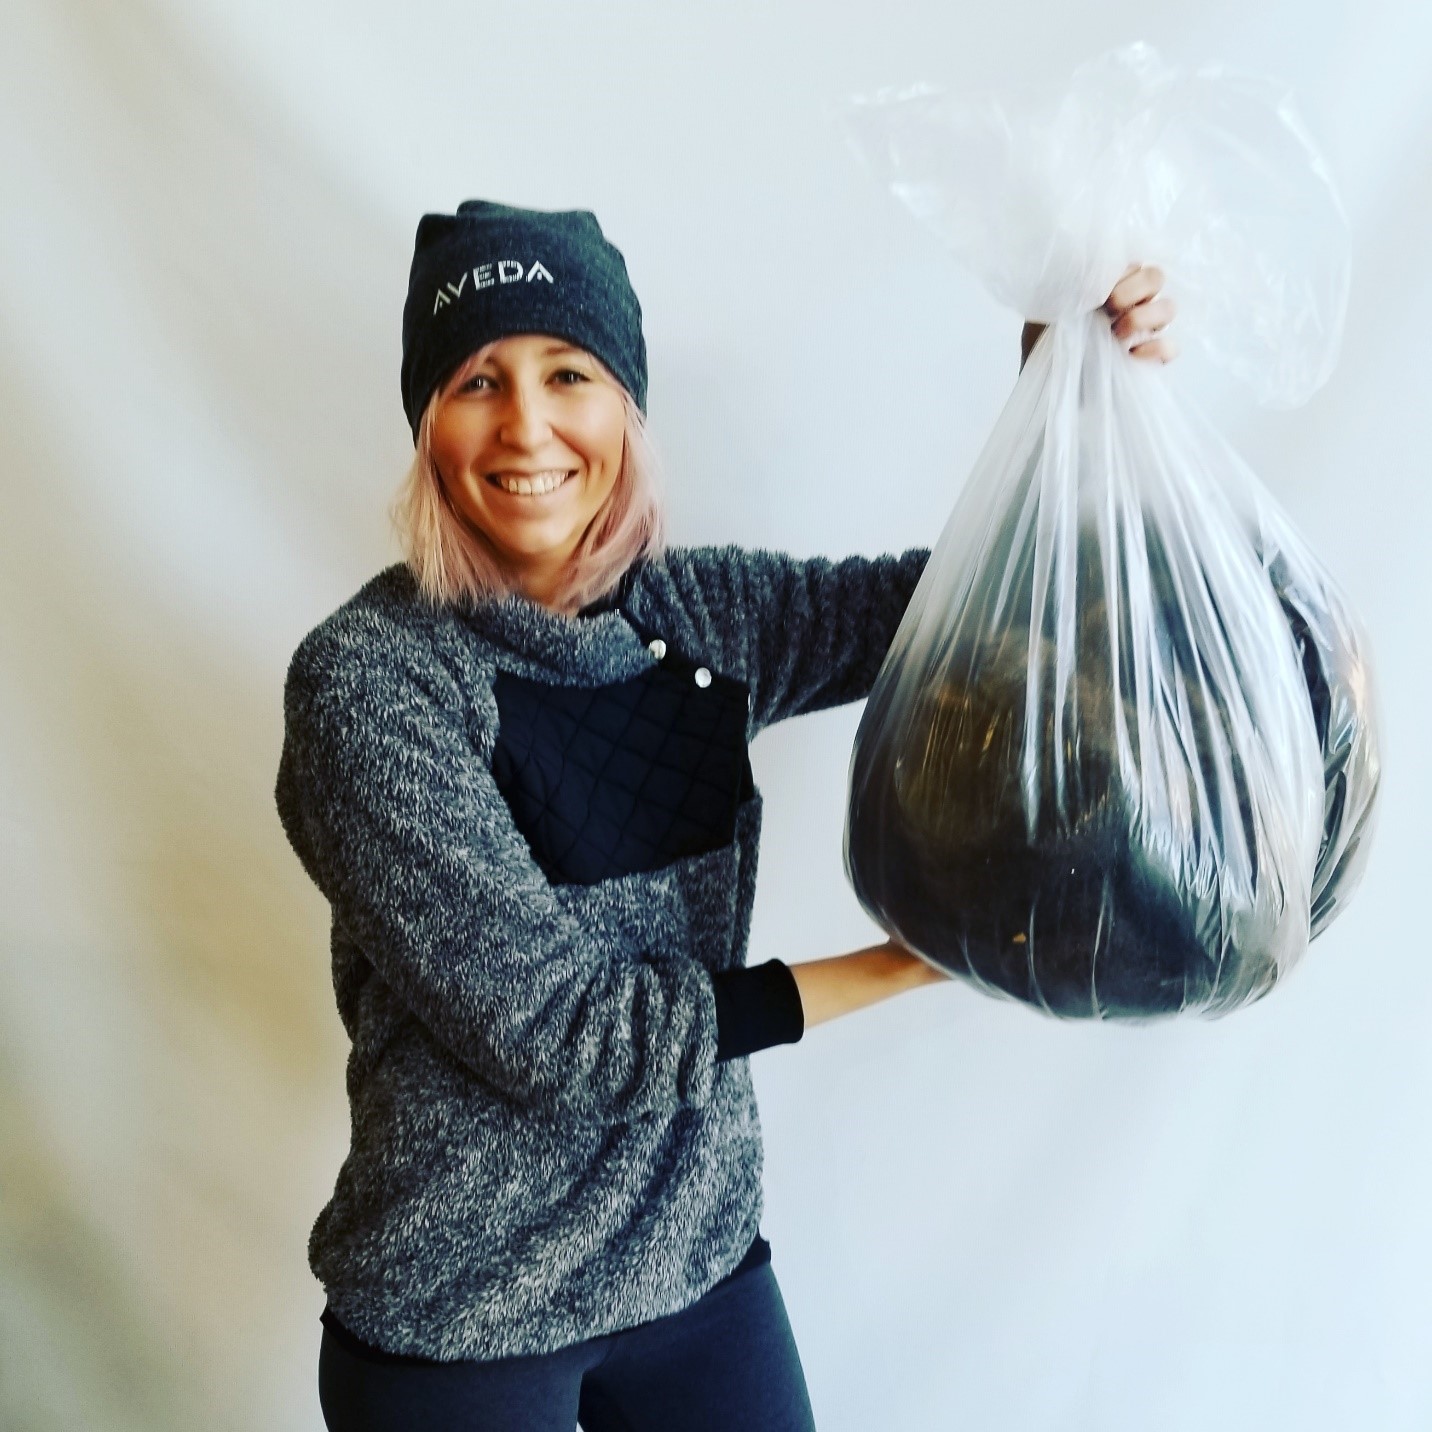 Stylist Cassie Roland, holding a bag of hair to be recycled, brought the idea of partnering with Green Cycle to Nostallja Studio.